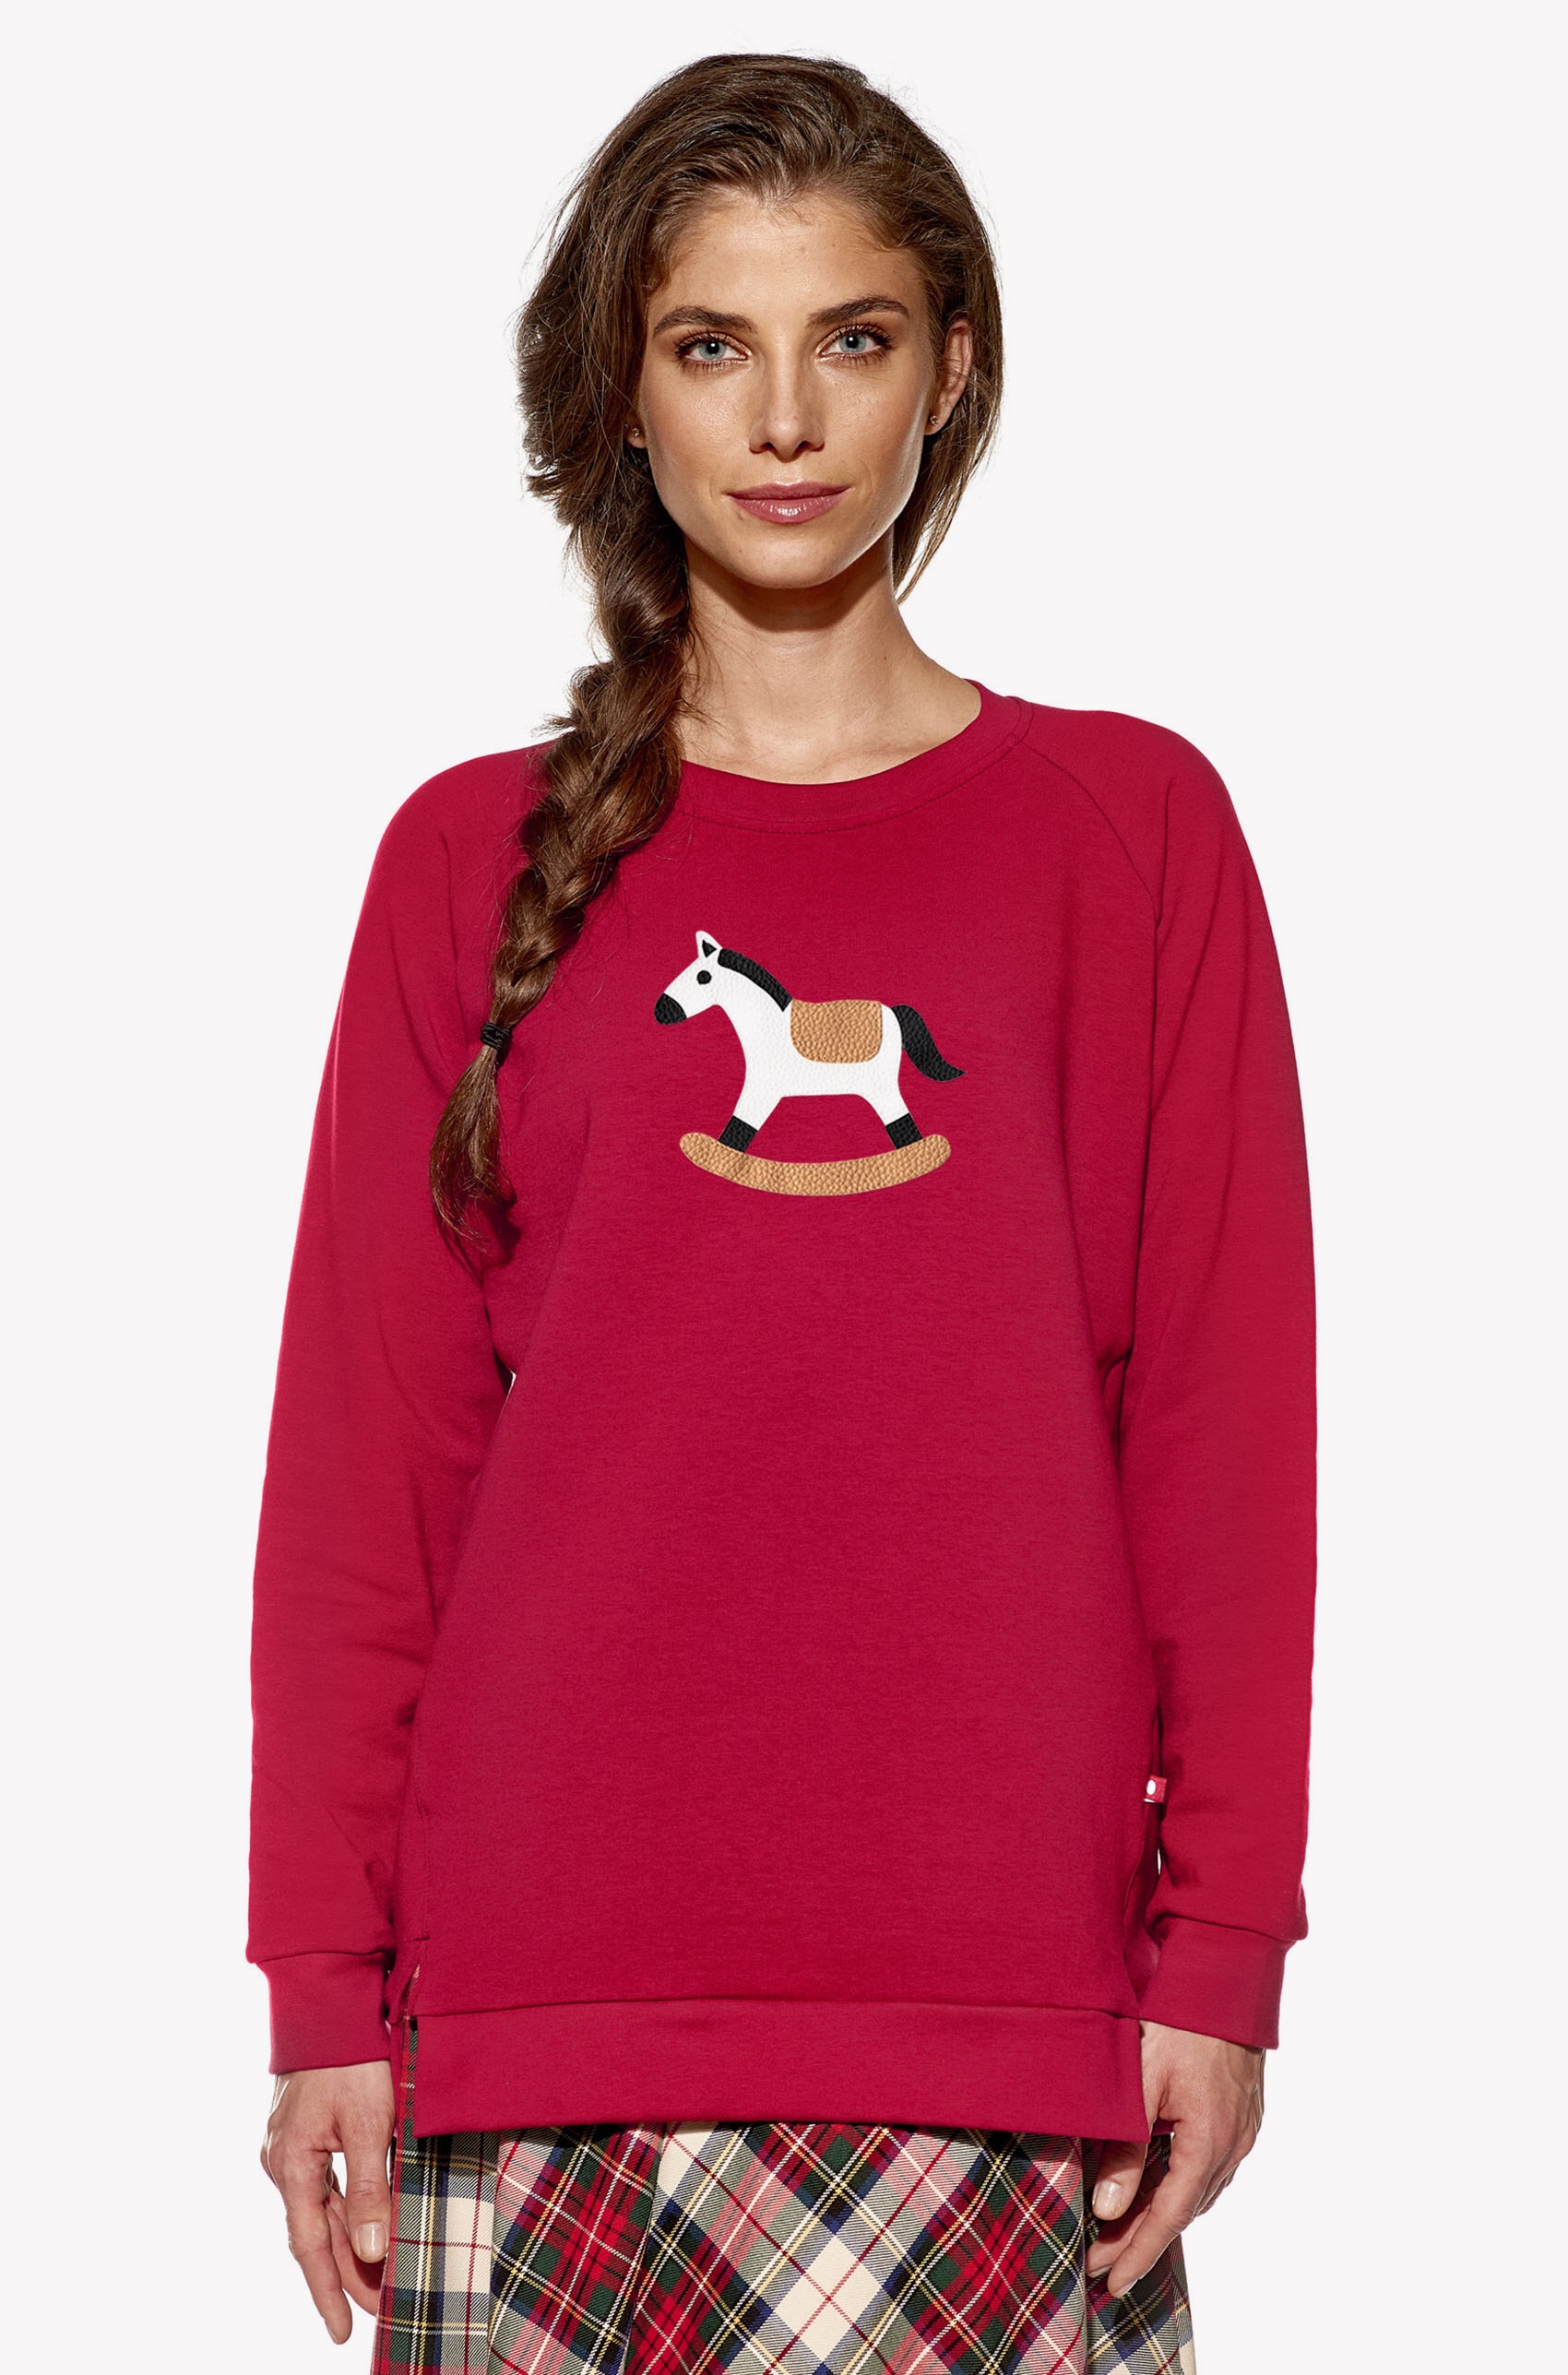 Hoodie with rocking horse